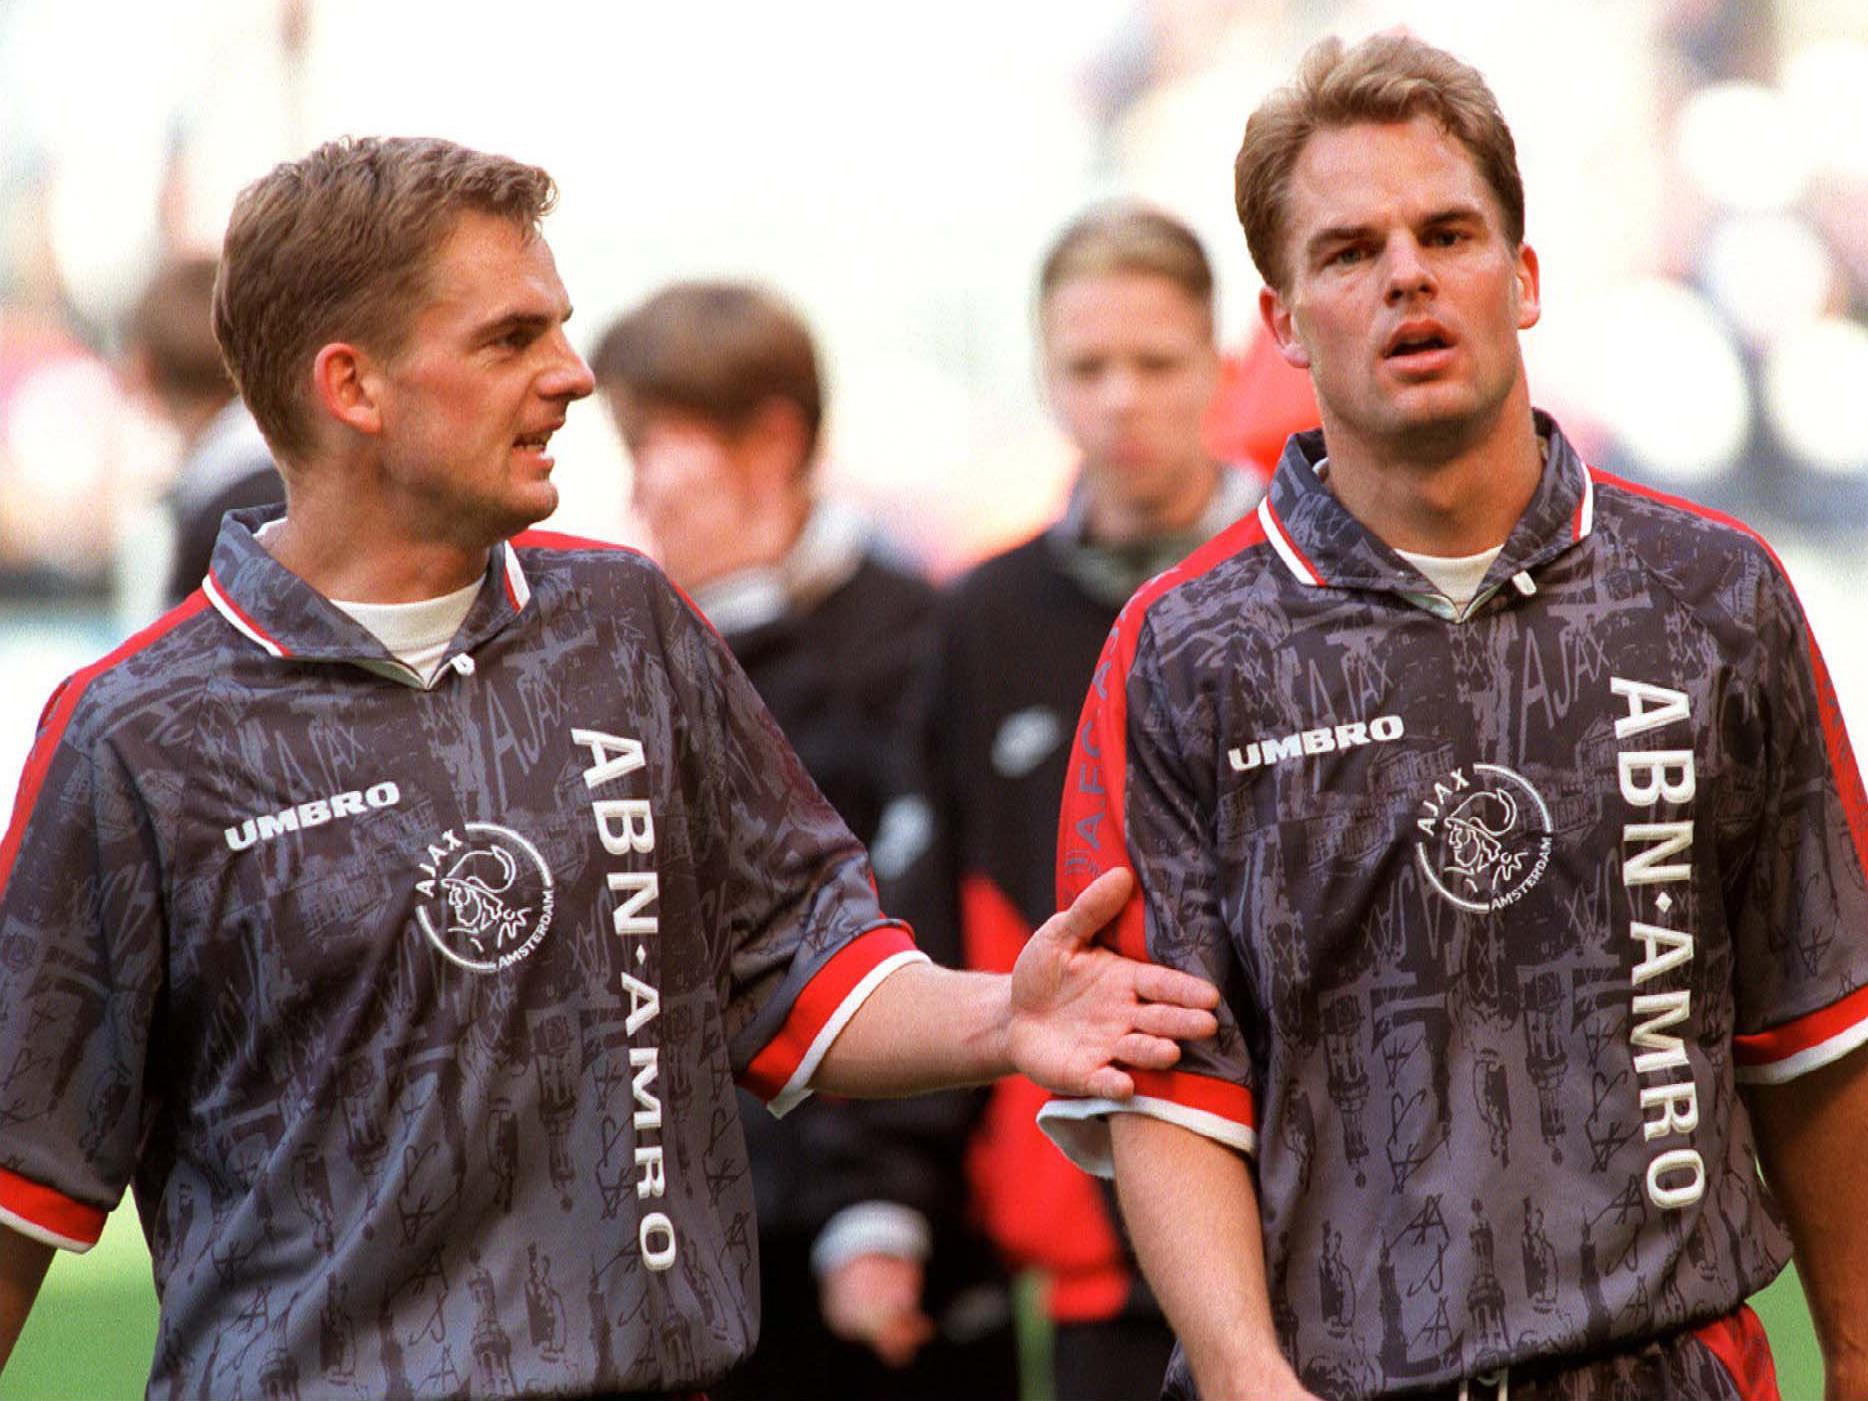 The De Boer brothers played at Ajax and the Netherlands together